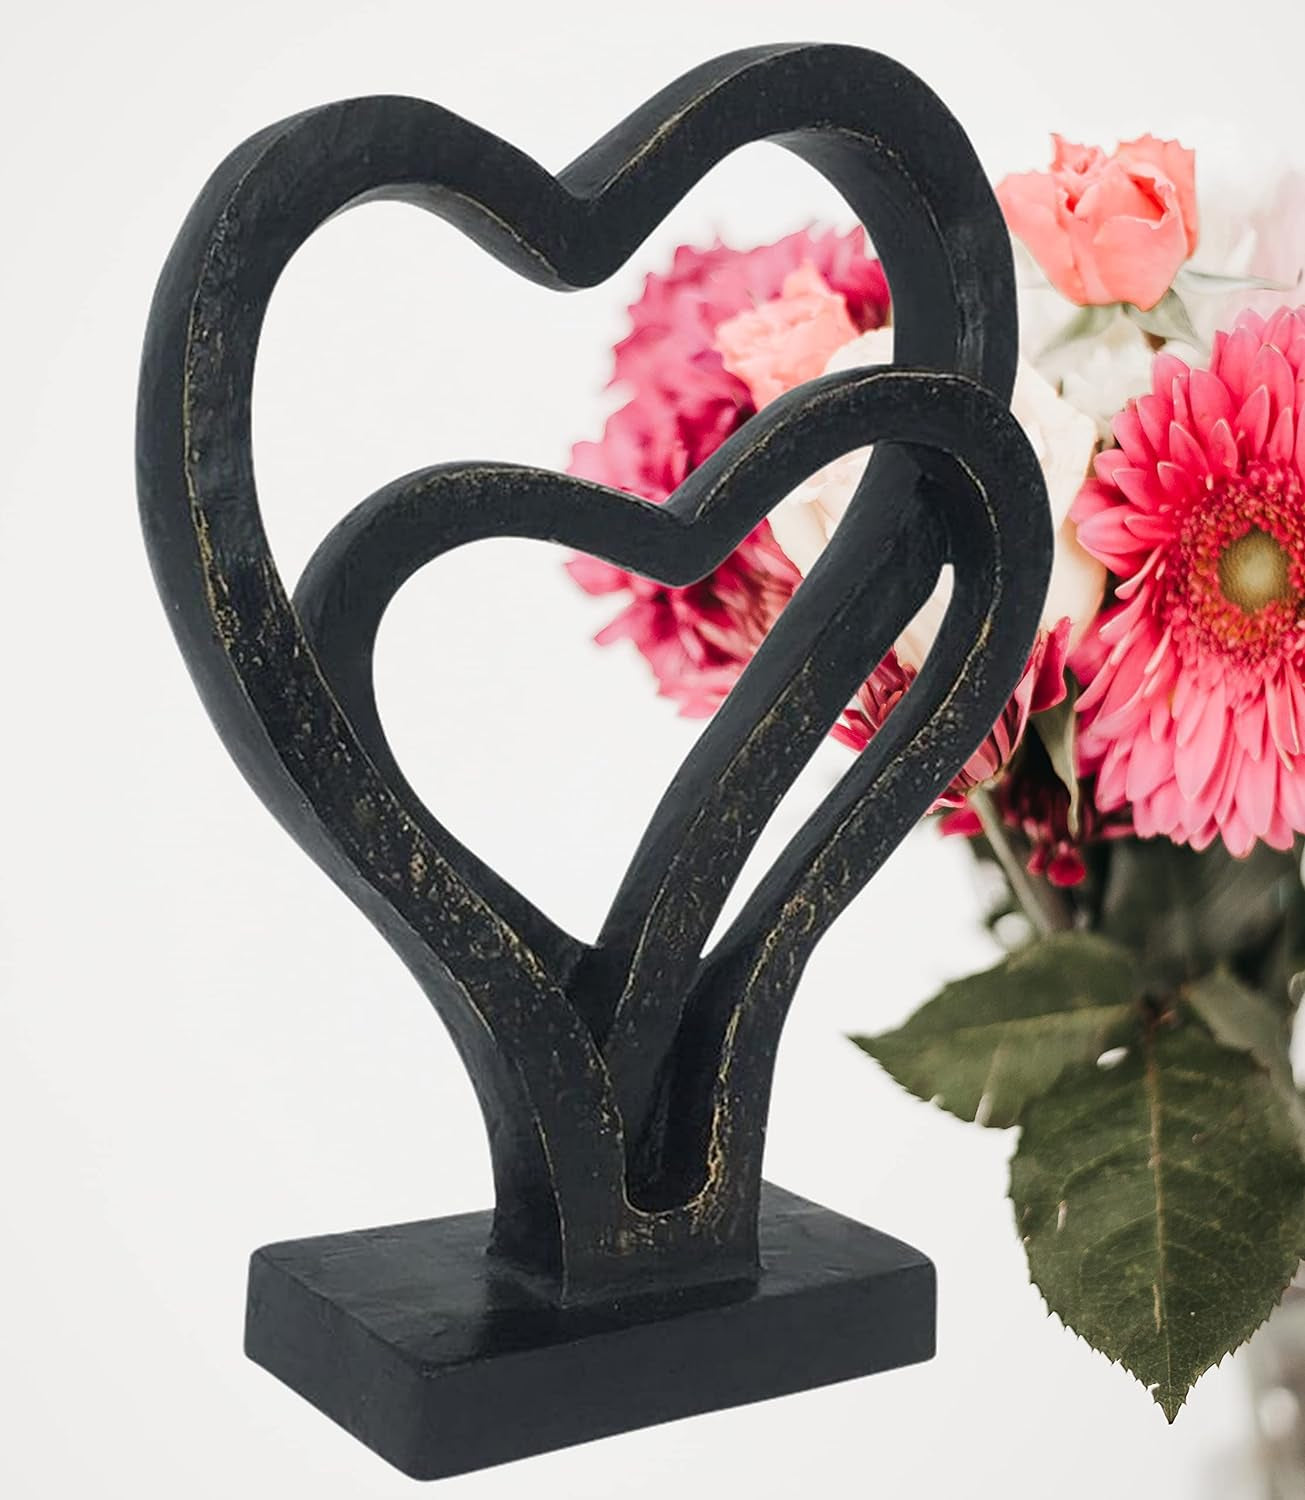 24827 Heart Statues Eternity Double Love Romantic Sculpture, 11 Inches, Anniversary Valentines Couple Gift for Her Home Decor, Modern Art Bond of Marriage